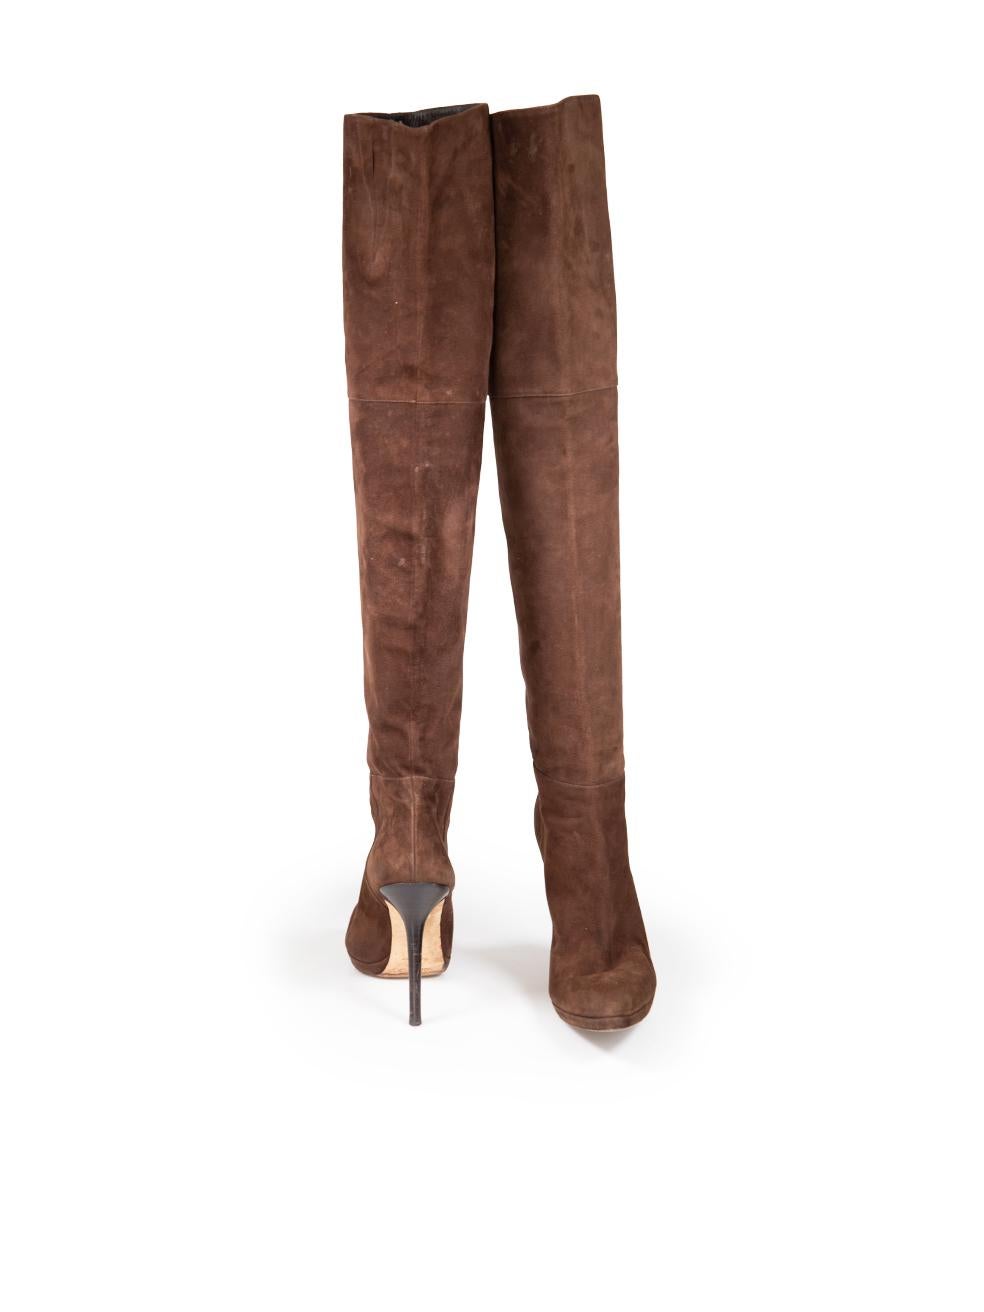 Jimmy Choo Brown Suede Over-The-Knee Boots Size IT 40 In Good Condition For Sale In London, GB